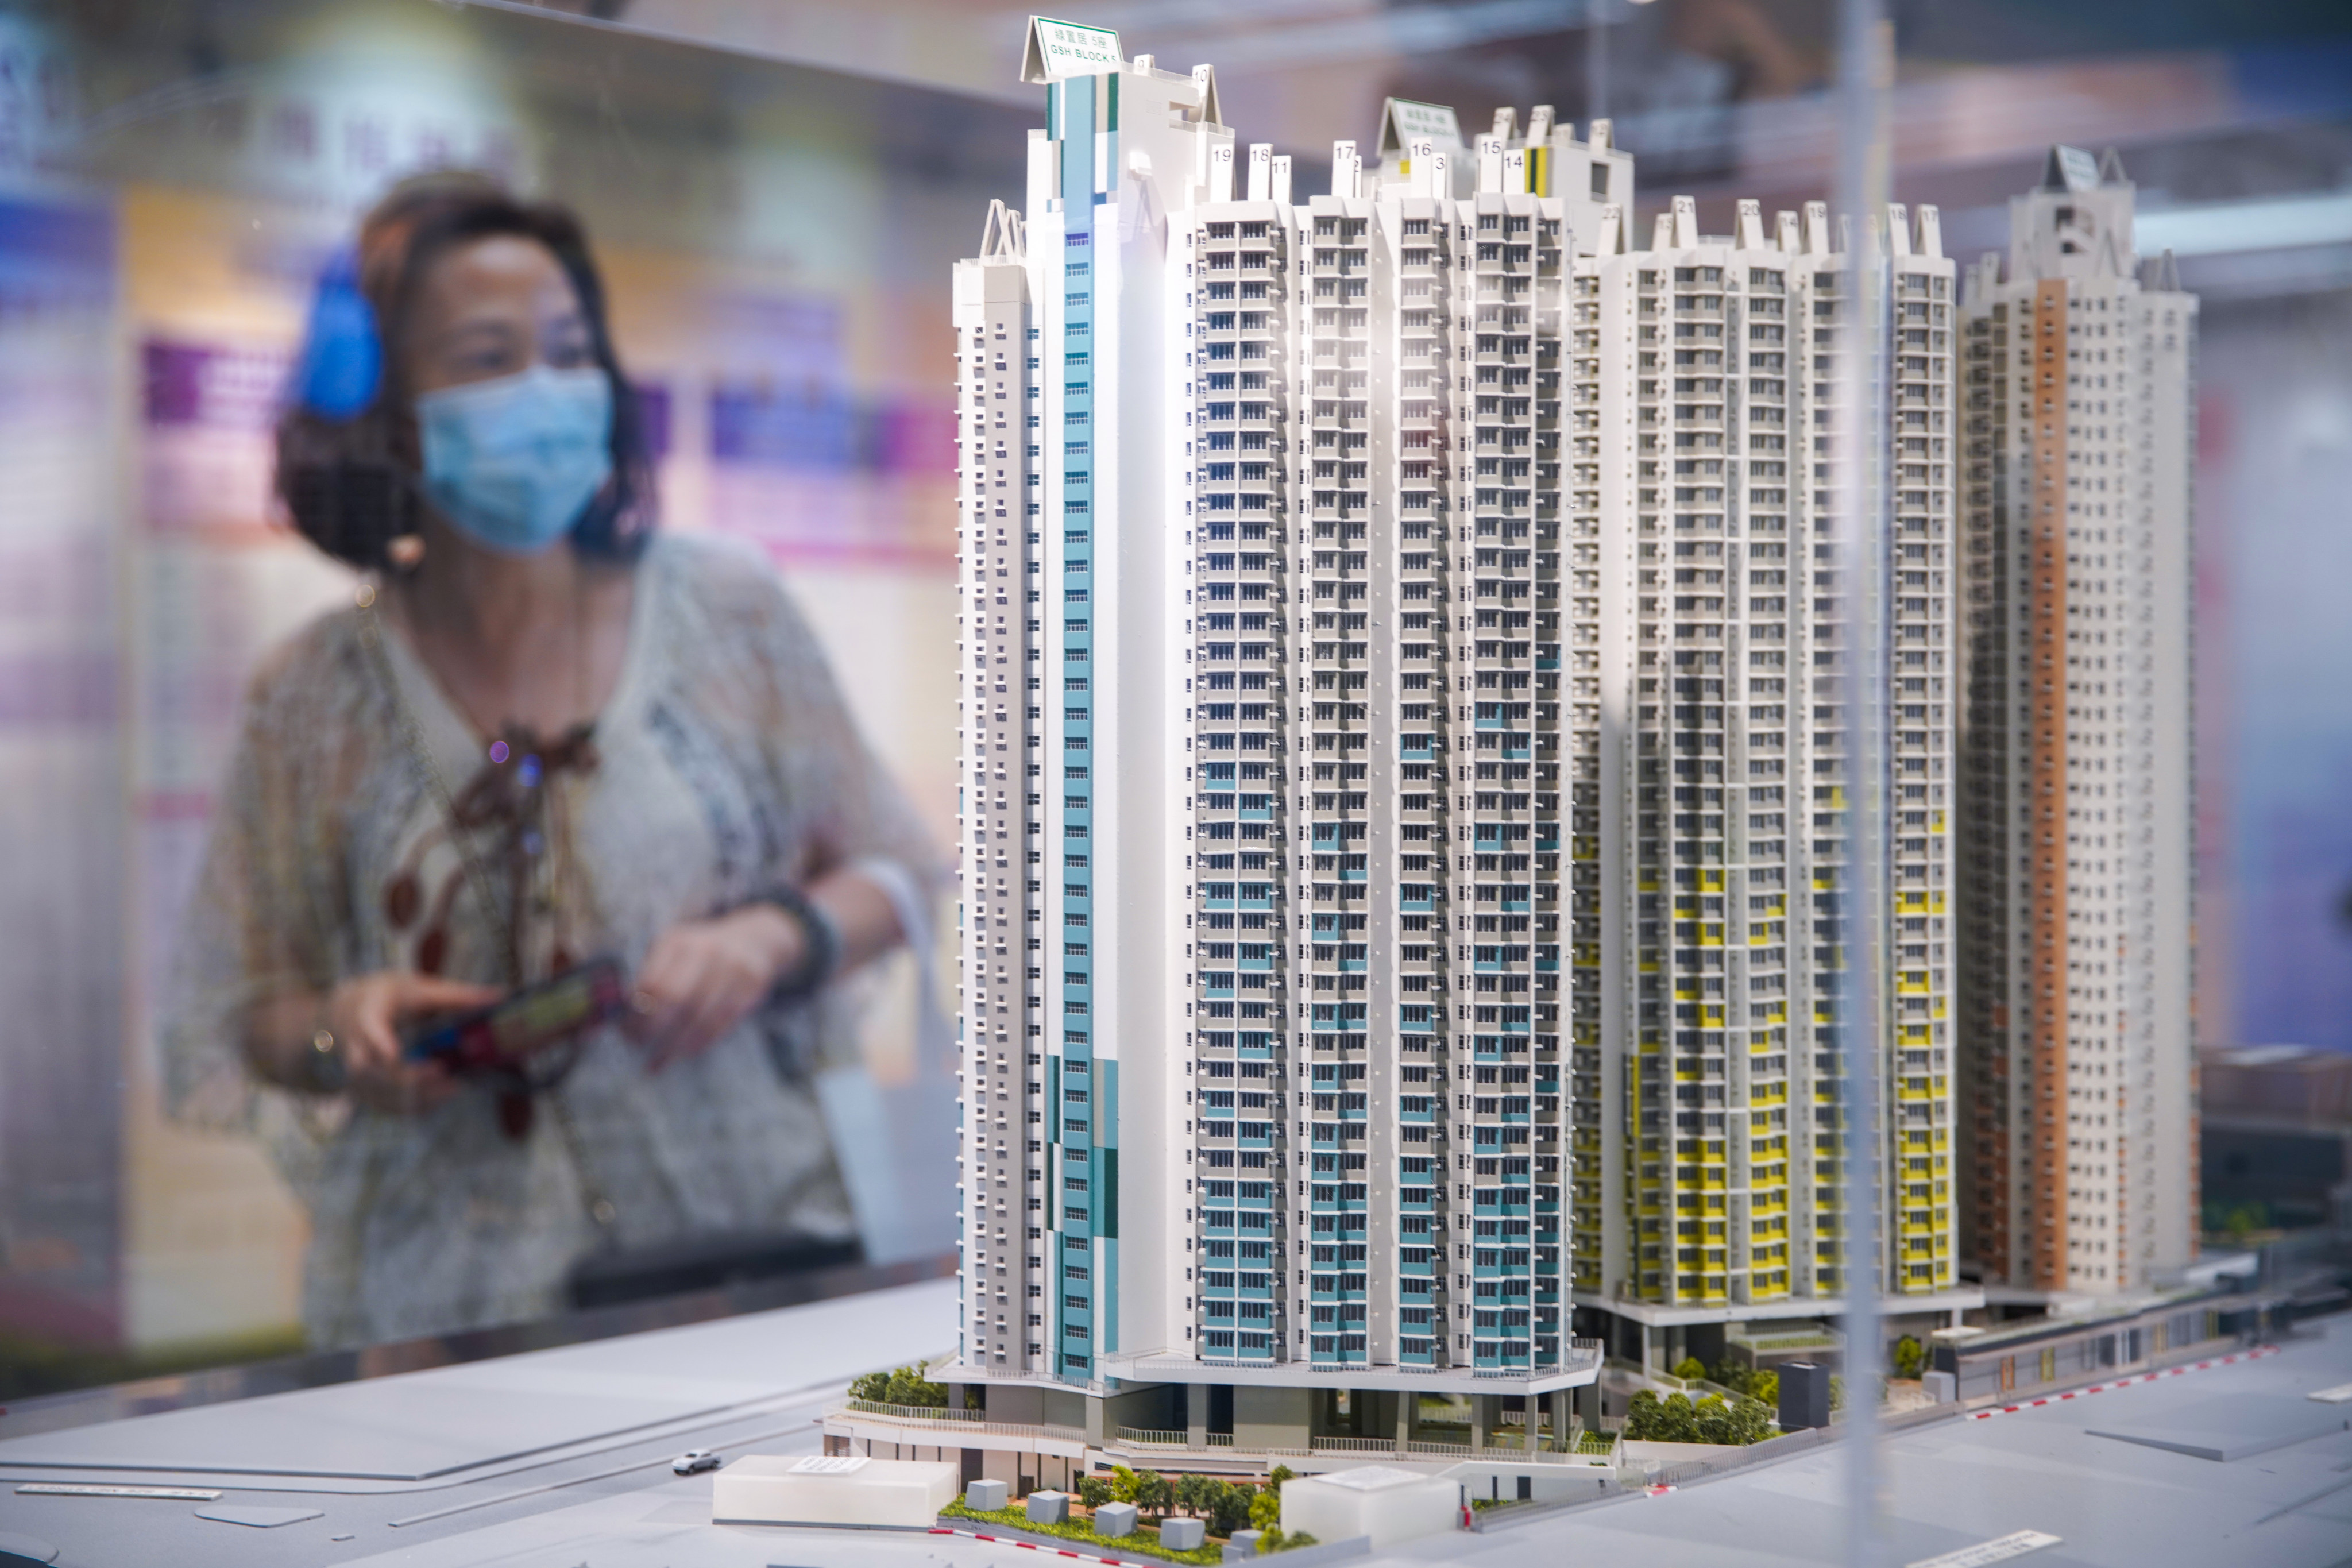 Potential buyers inspect a development of government-subsidised housing. Photo: Winson Wong